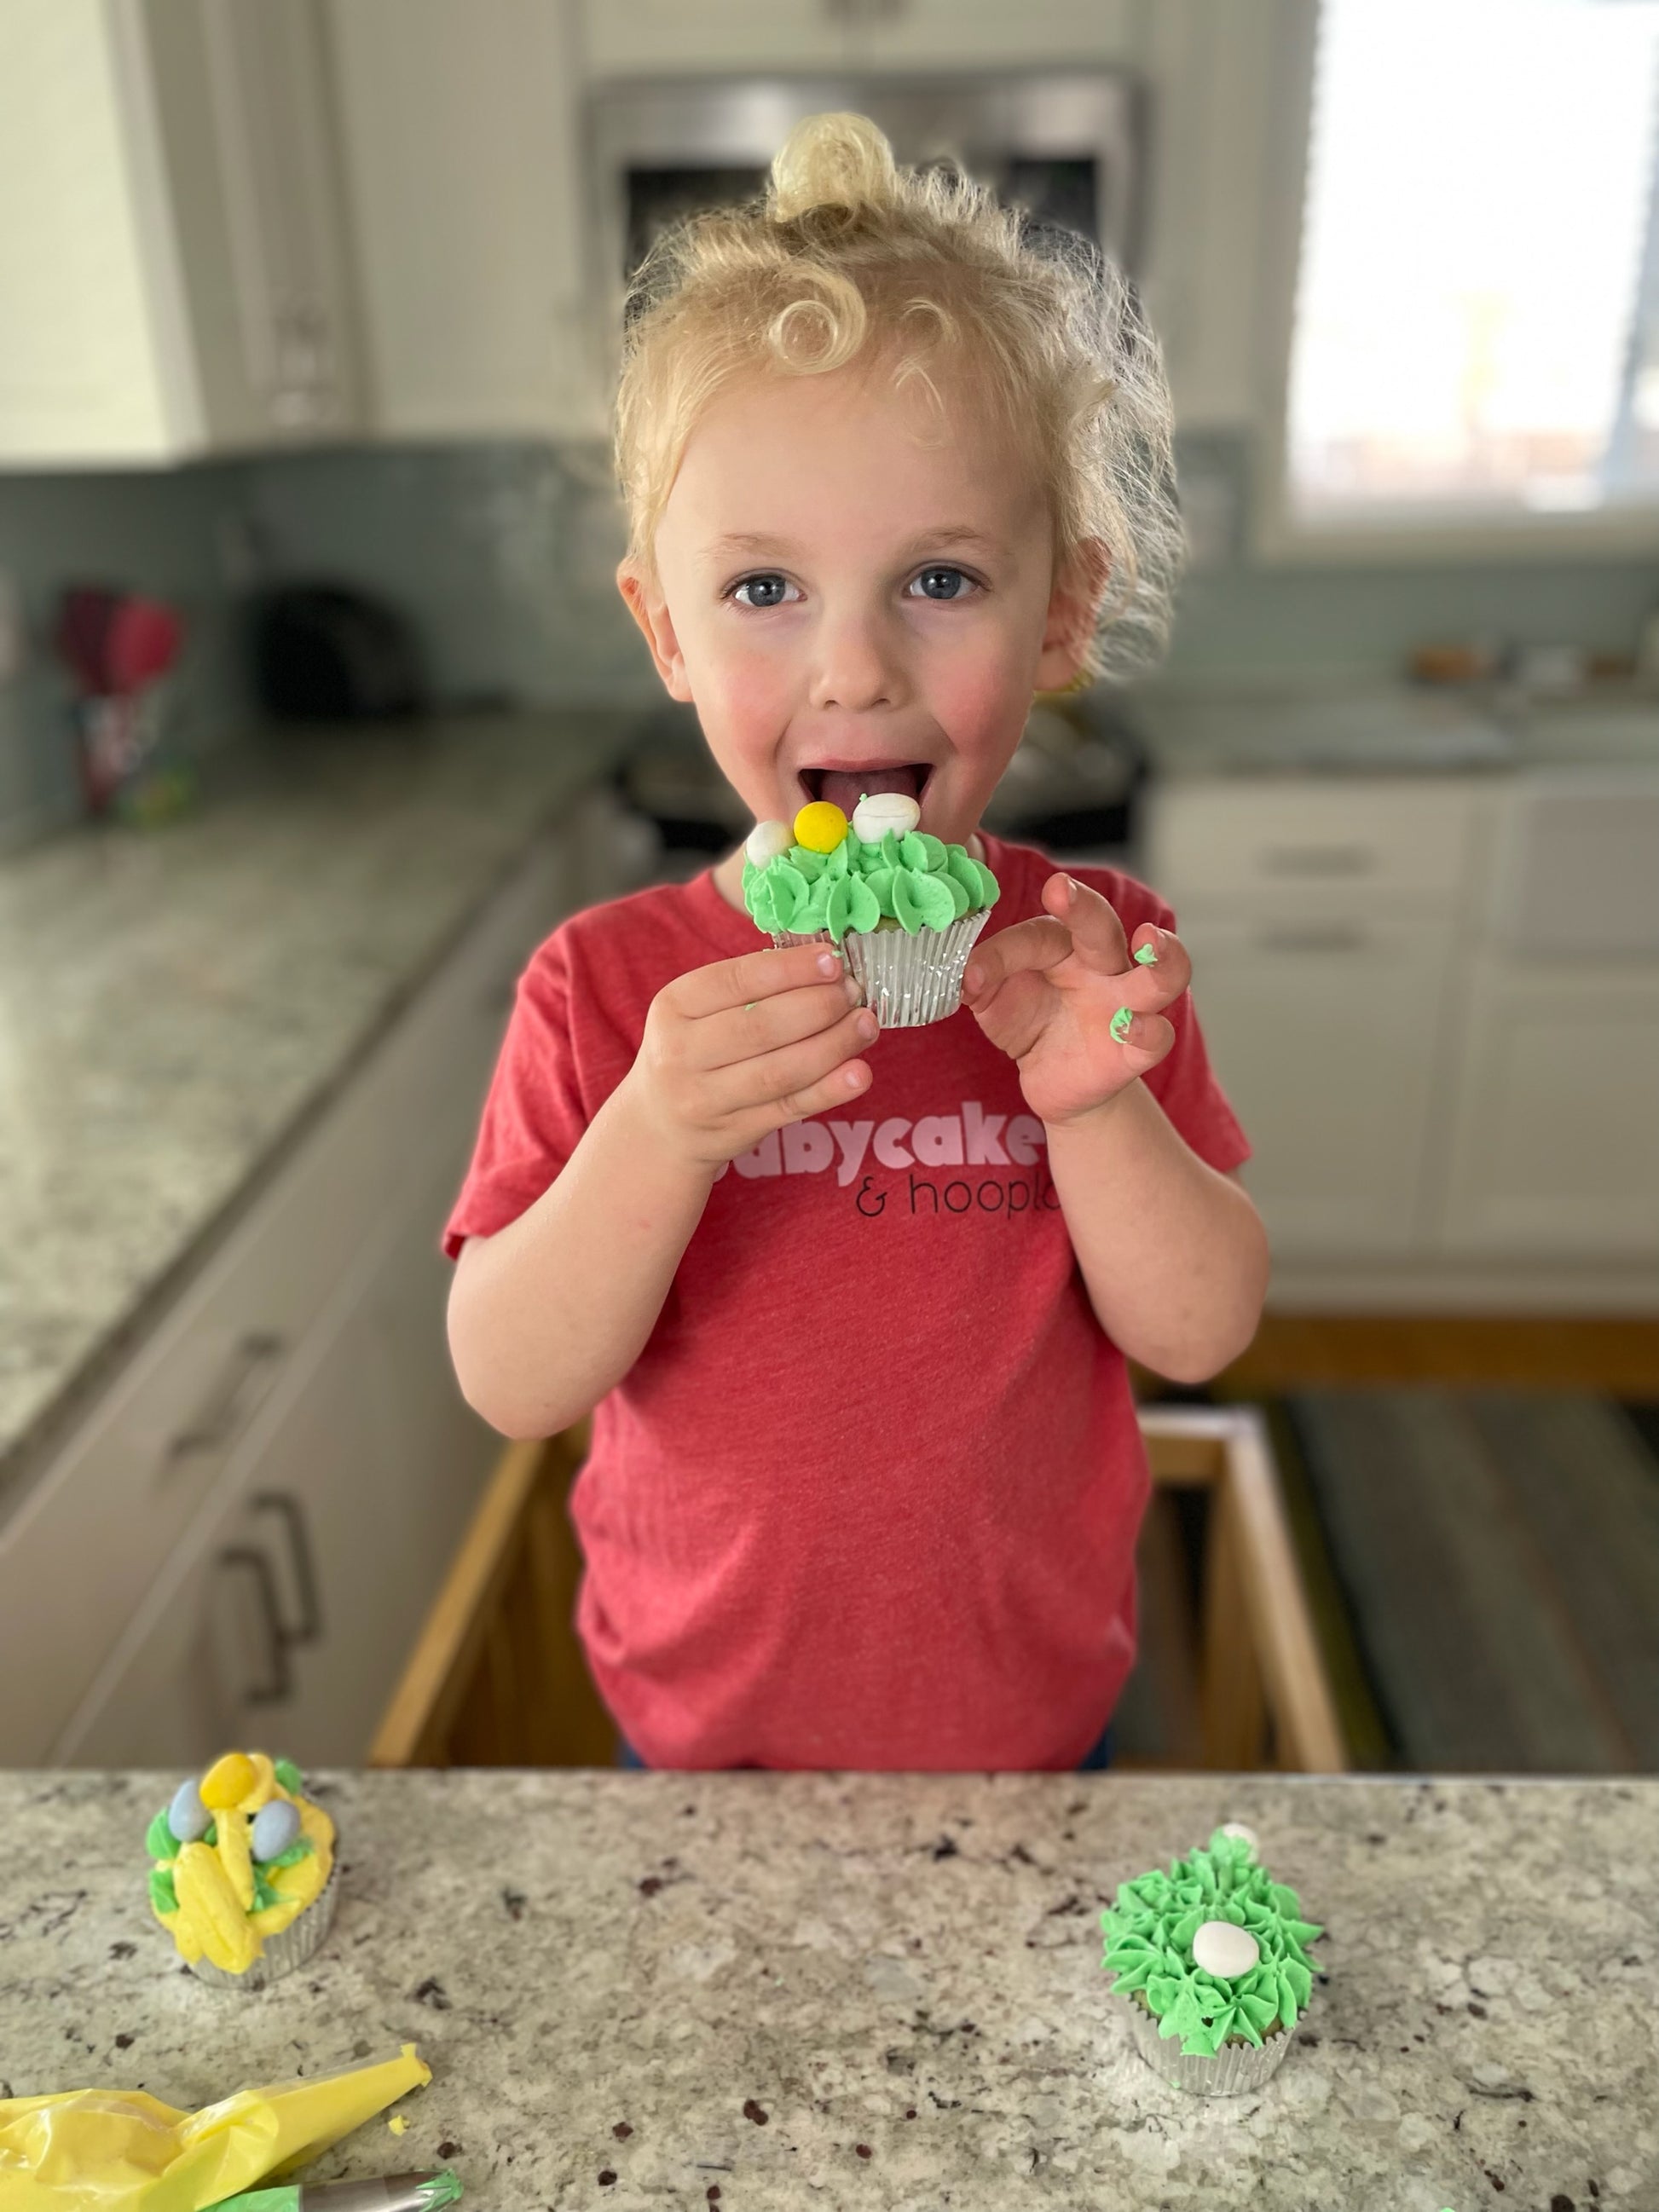 A little boy enjoys the fruits of his labor after taking home a DIY cupcake kit. He smiles as he opens his mouth to eat a cupcake. Two other decorated cupcakes and piping bags lay on the counter in front of him. He is wearing the babycakes and hoopla shirt, which fits him well.